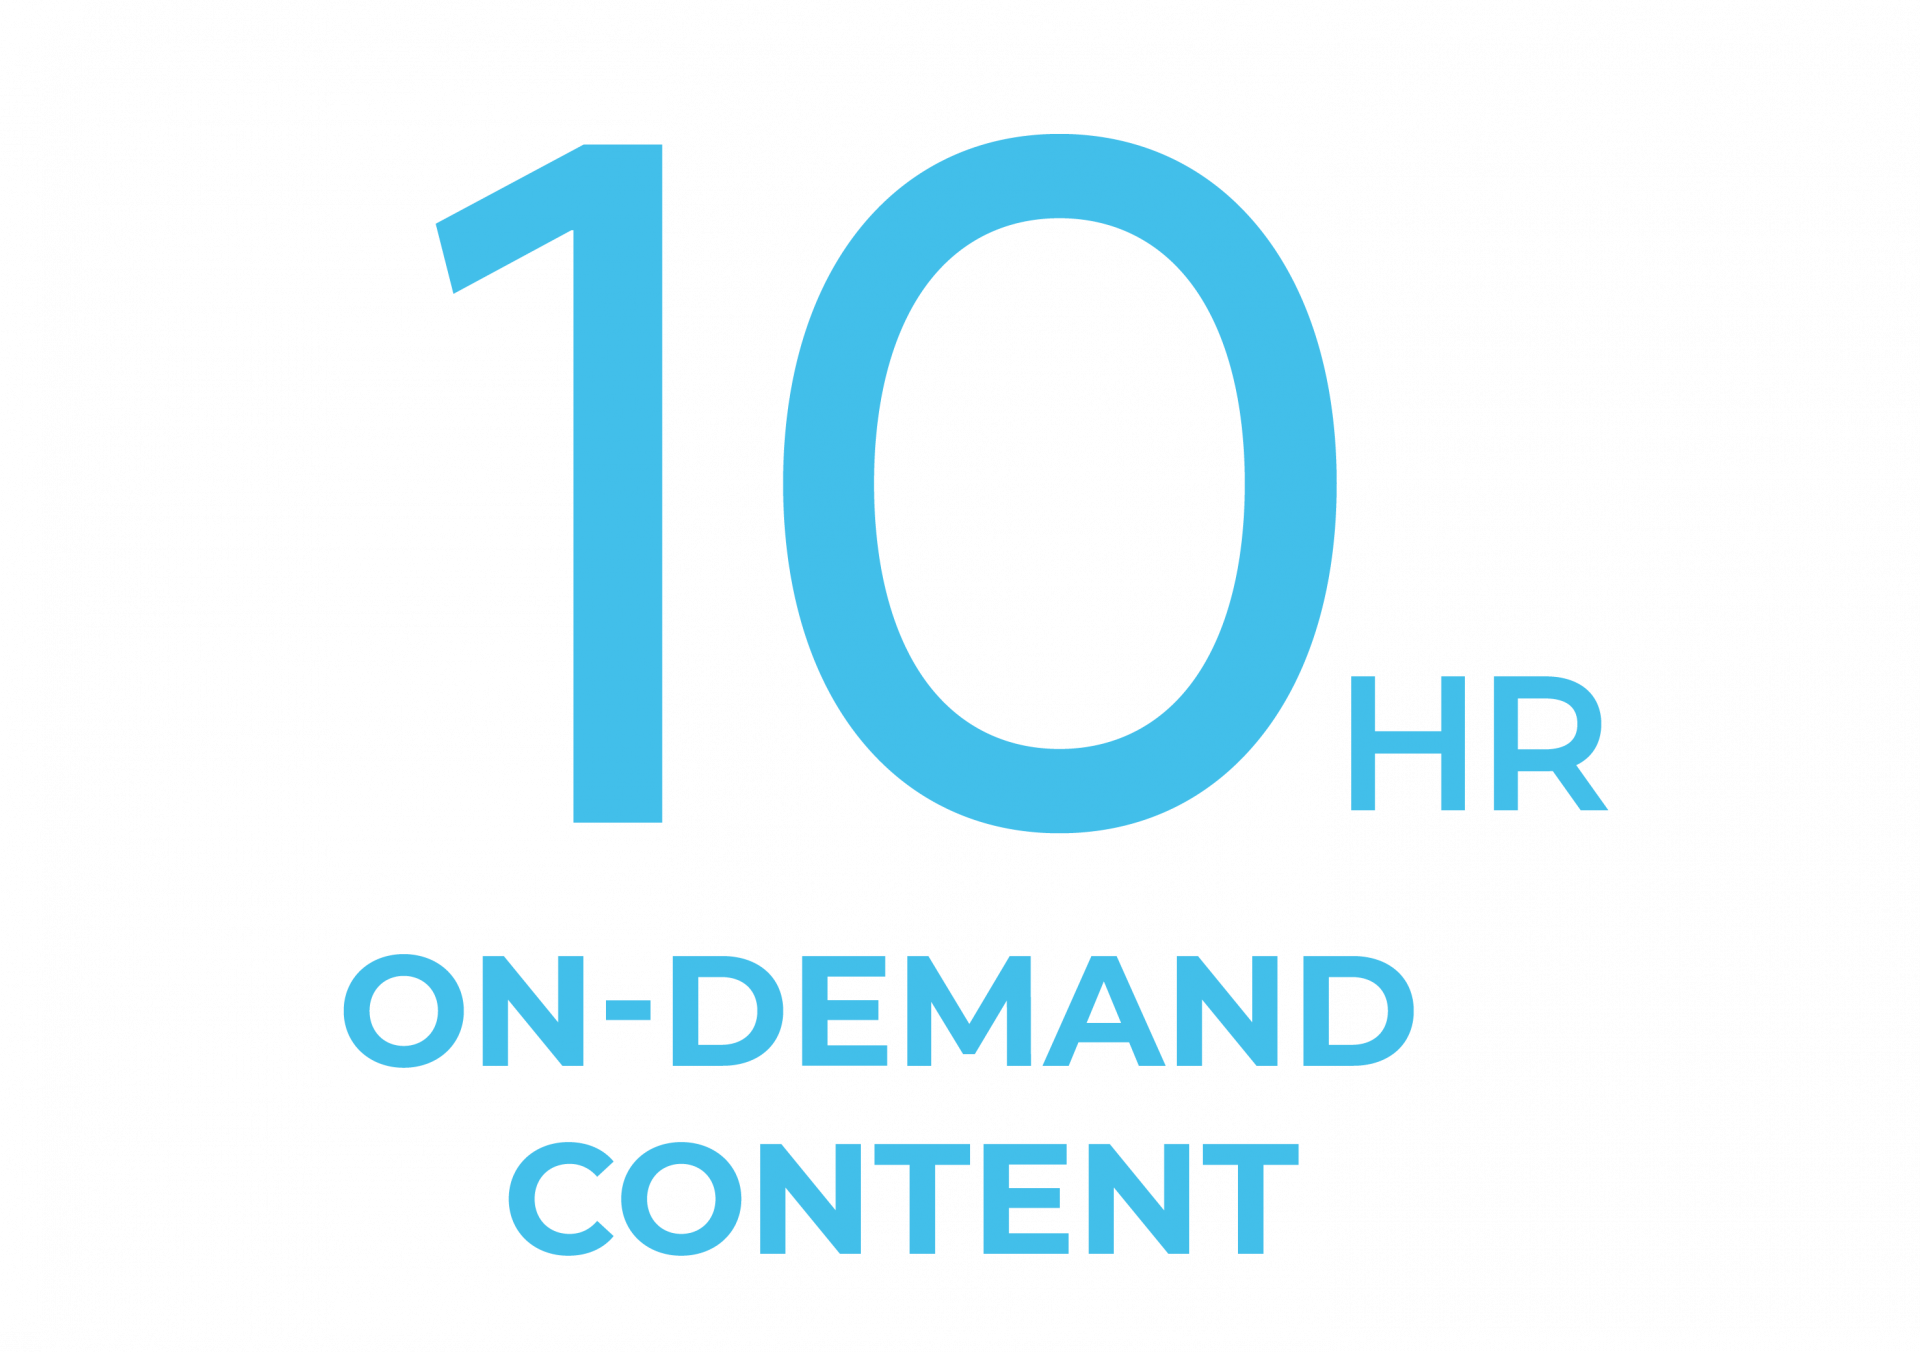 8 HOURS ON-DEMAND CONTENT